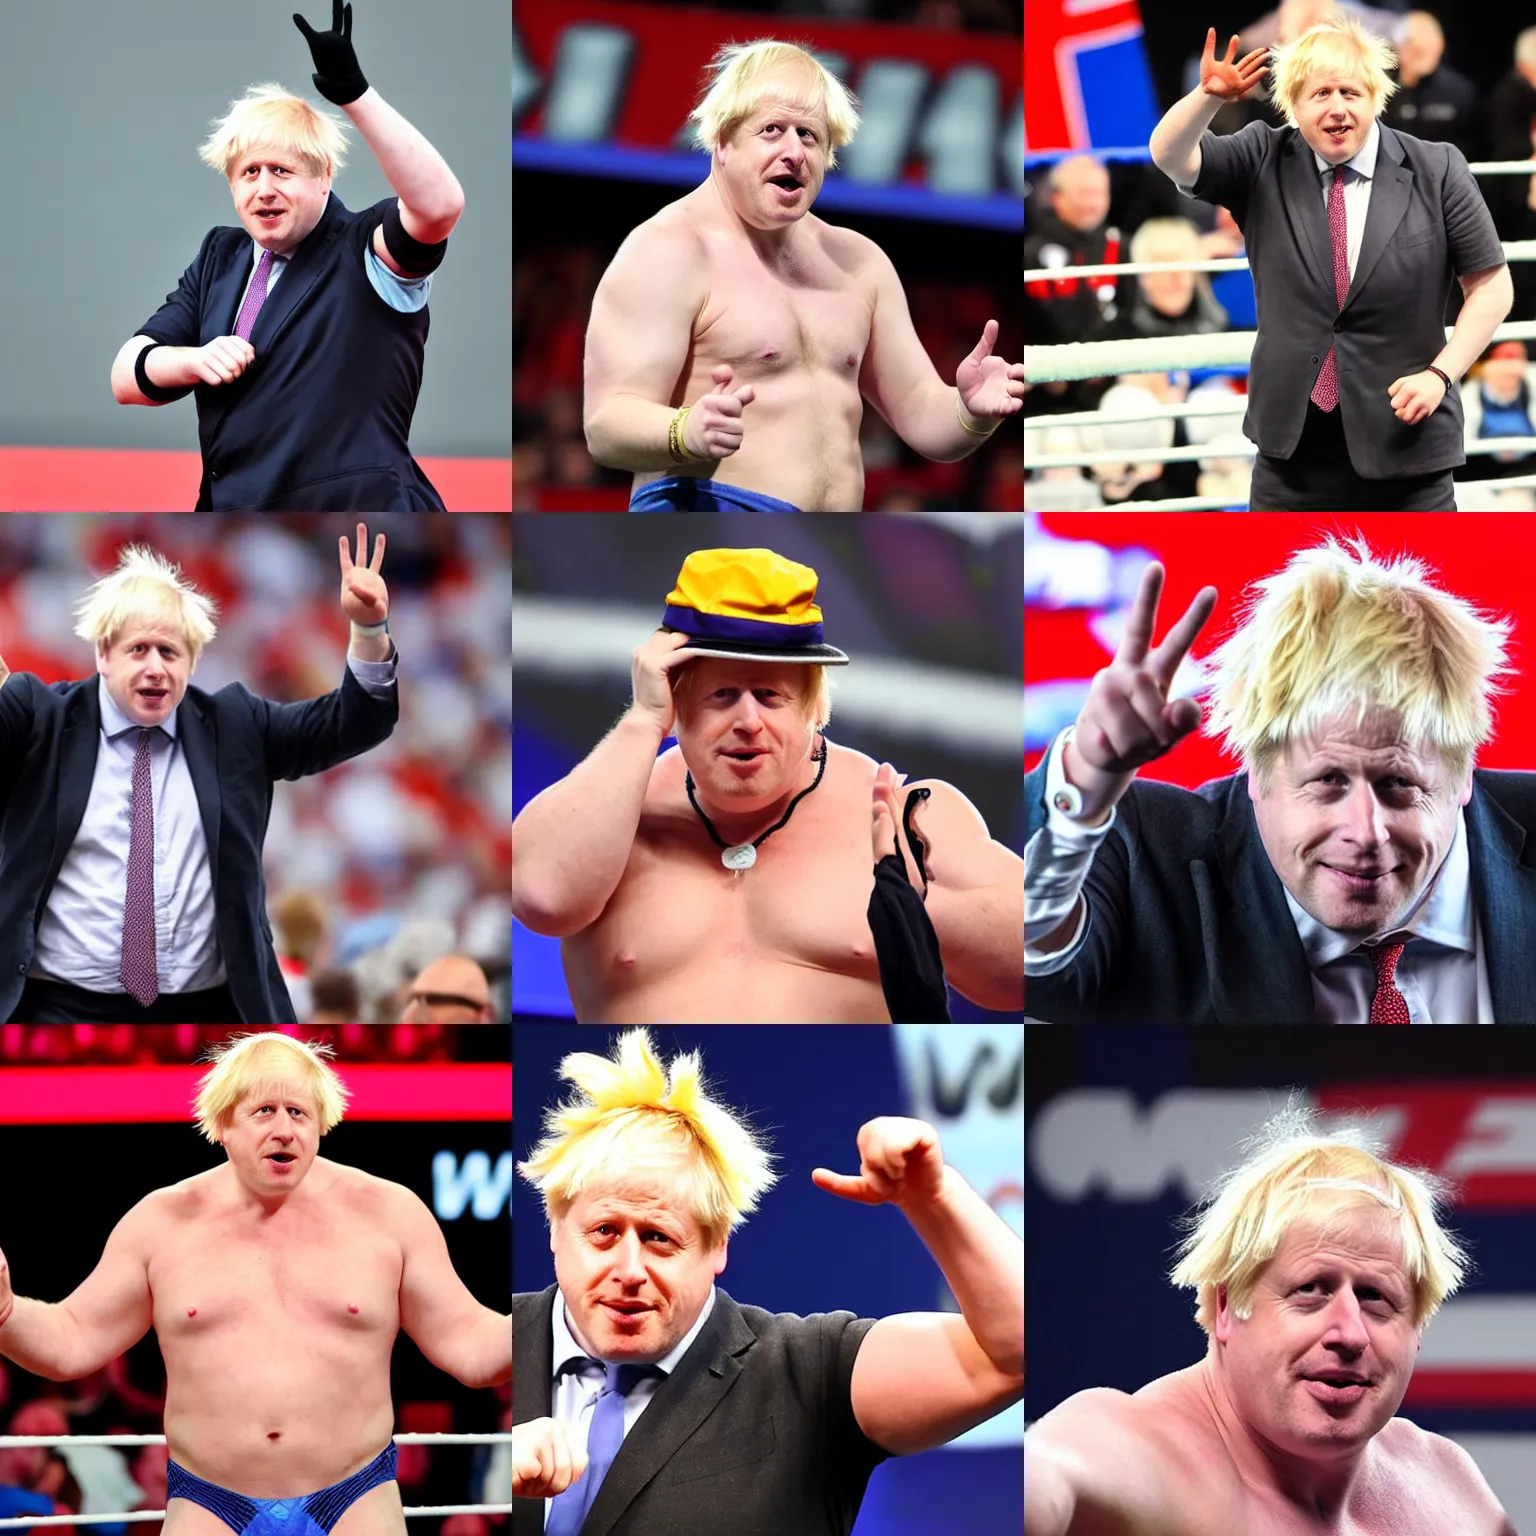 Prompt: boris johnson as a muscular wwe wrestler wearing a cap hat. he is angry and waving to the camera. his face are partially hidden behind his hand